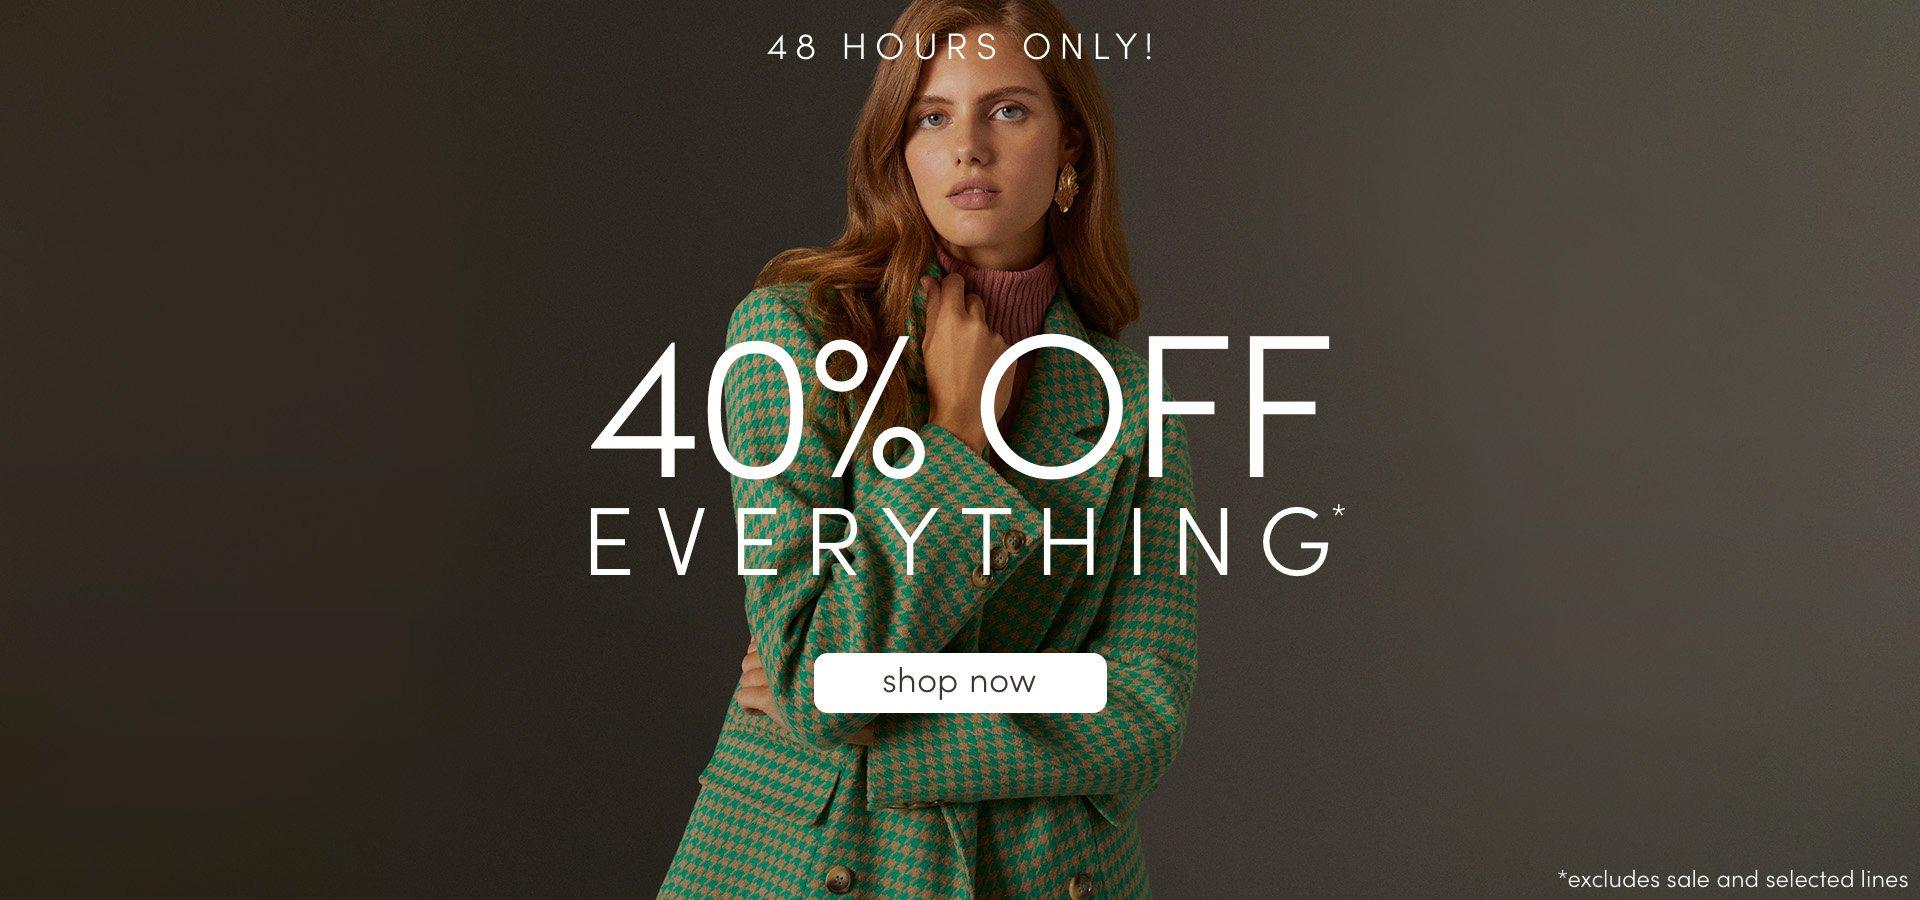 40% off everything